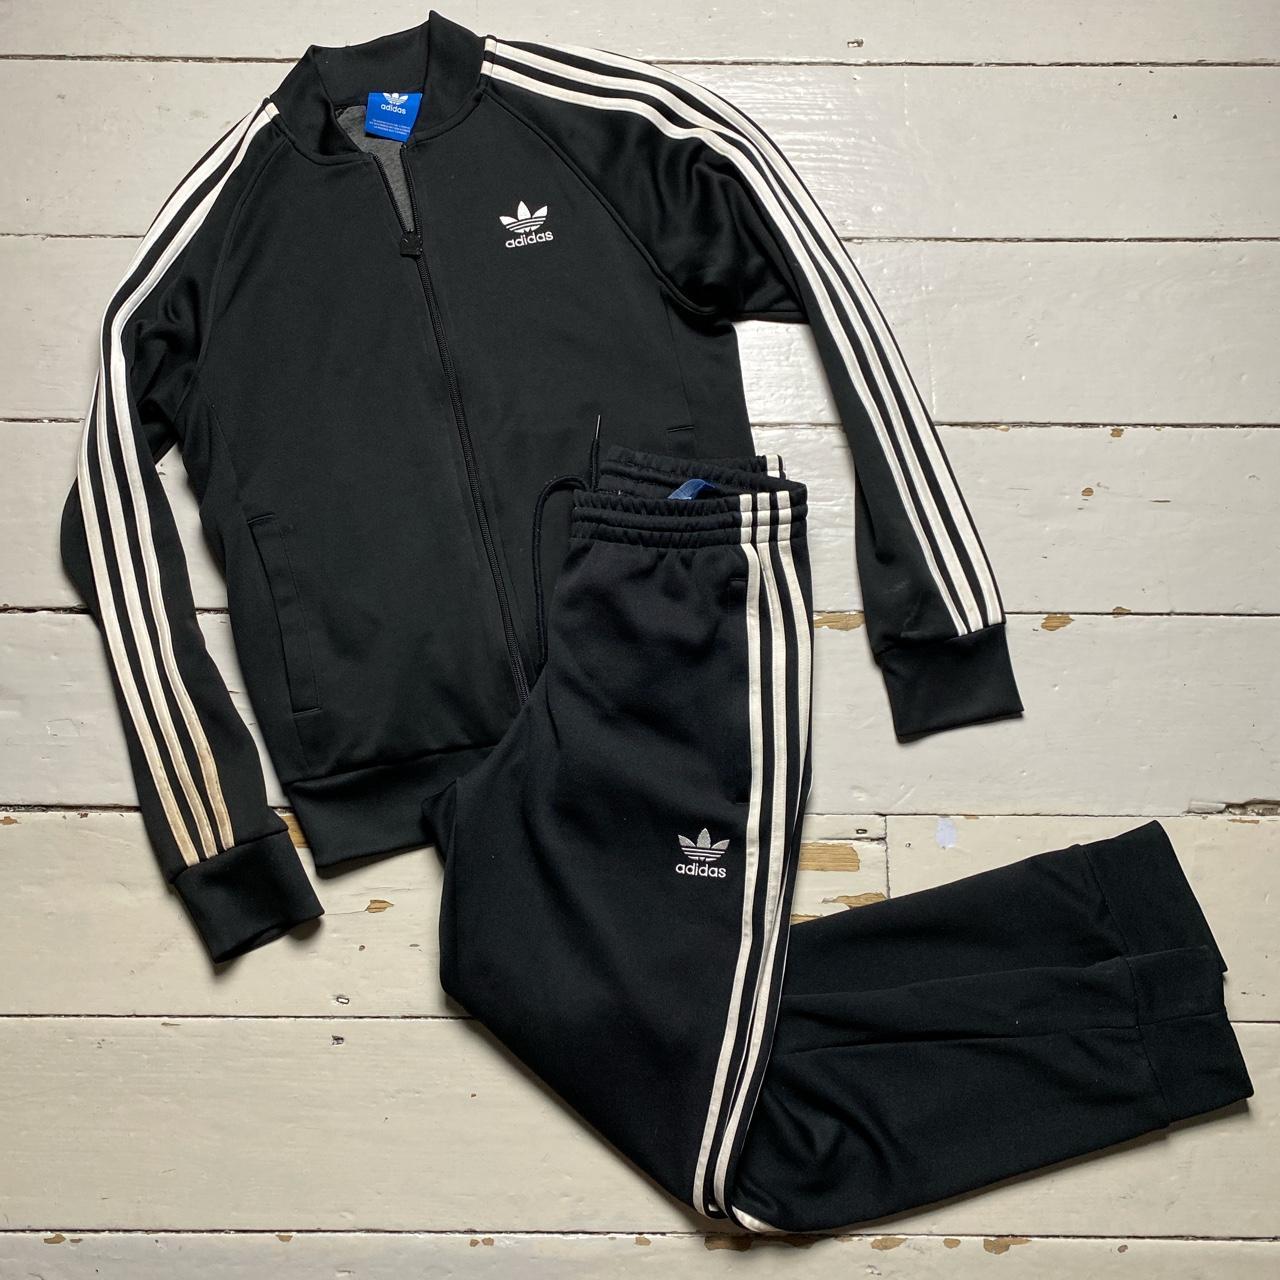 Adidas SST Black and White Tracksuit